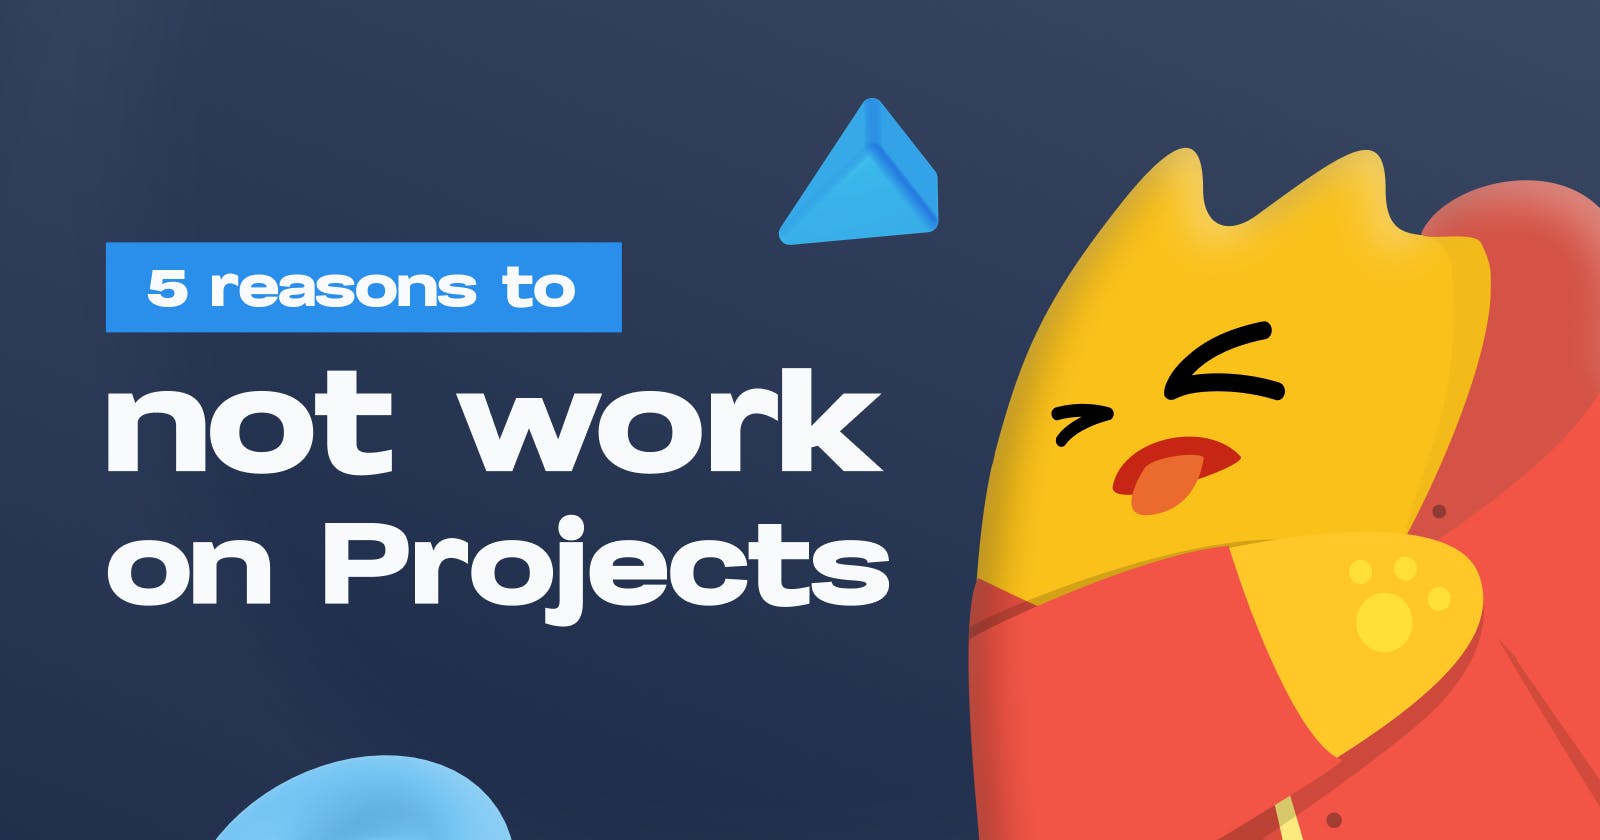 Top 5 reasons to not work on any projects